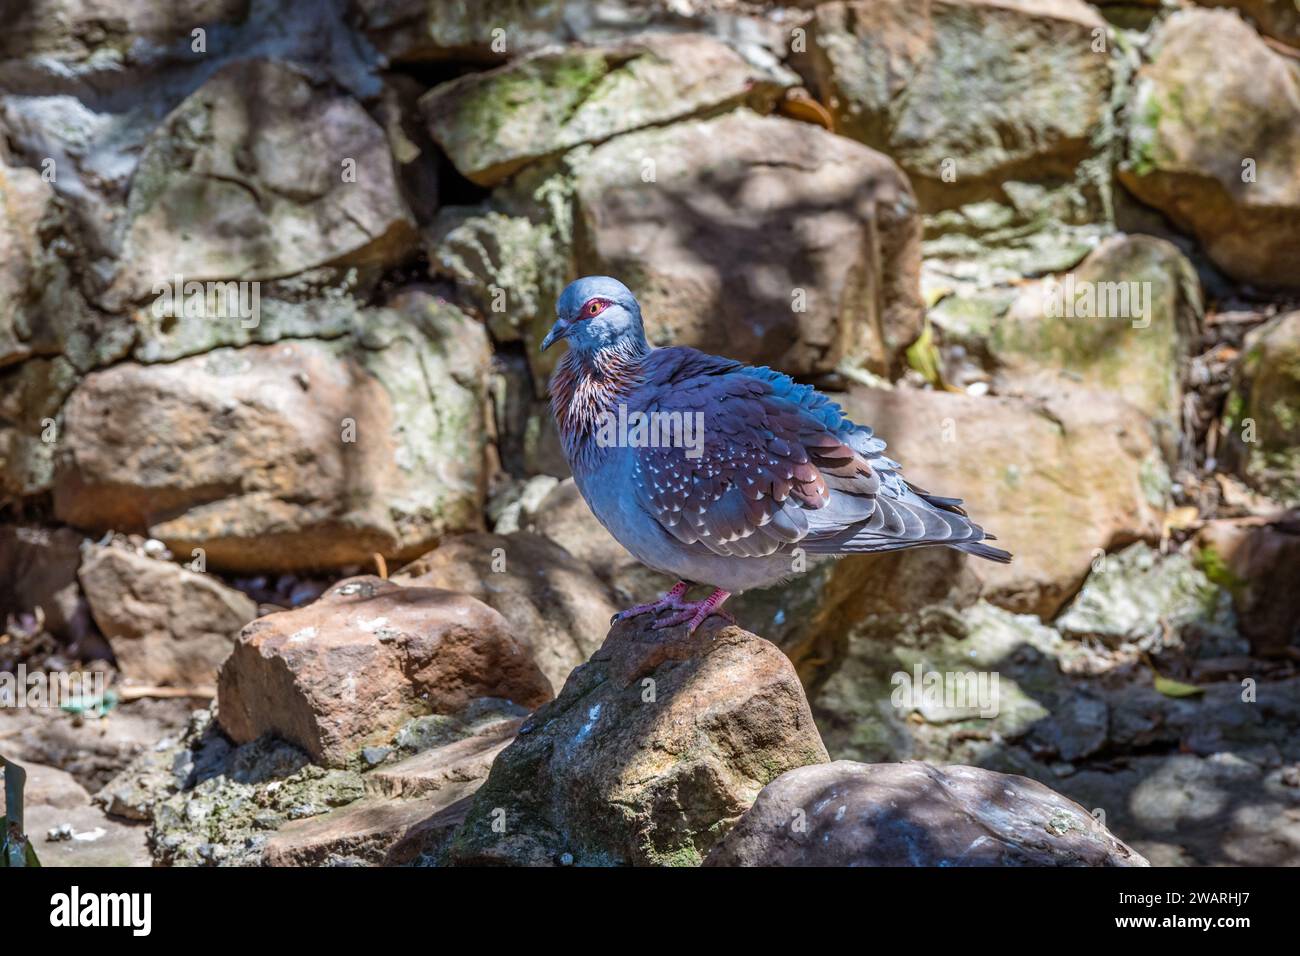 Speckled pigeon, beautiful blue bird, stock photography Stock Photo